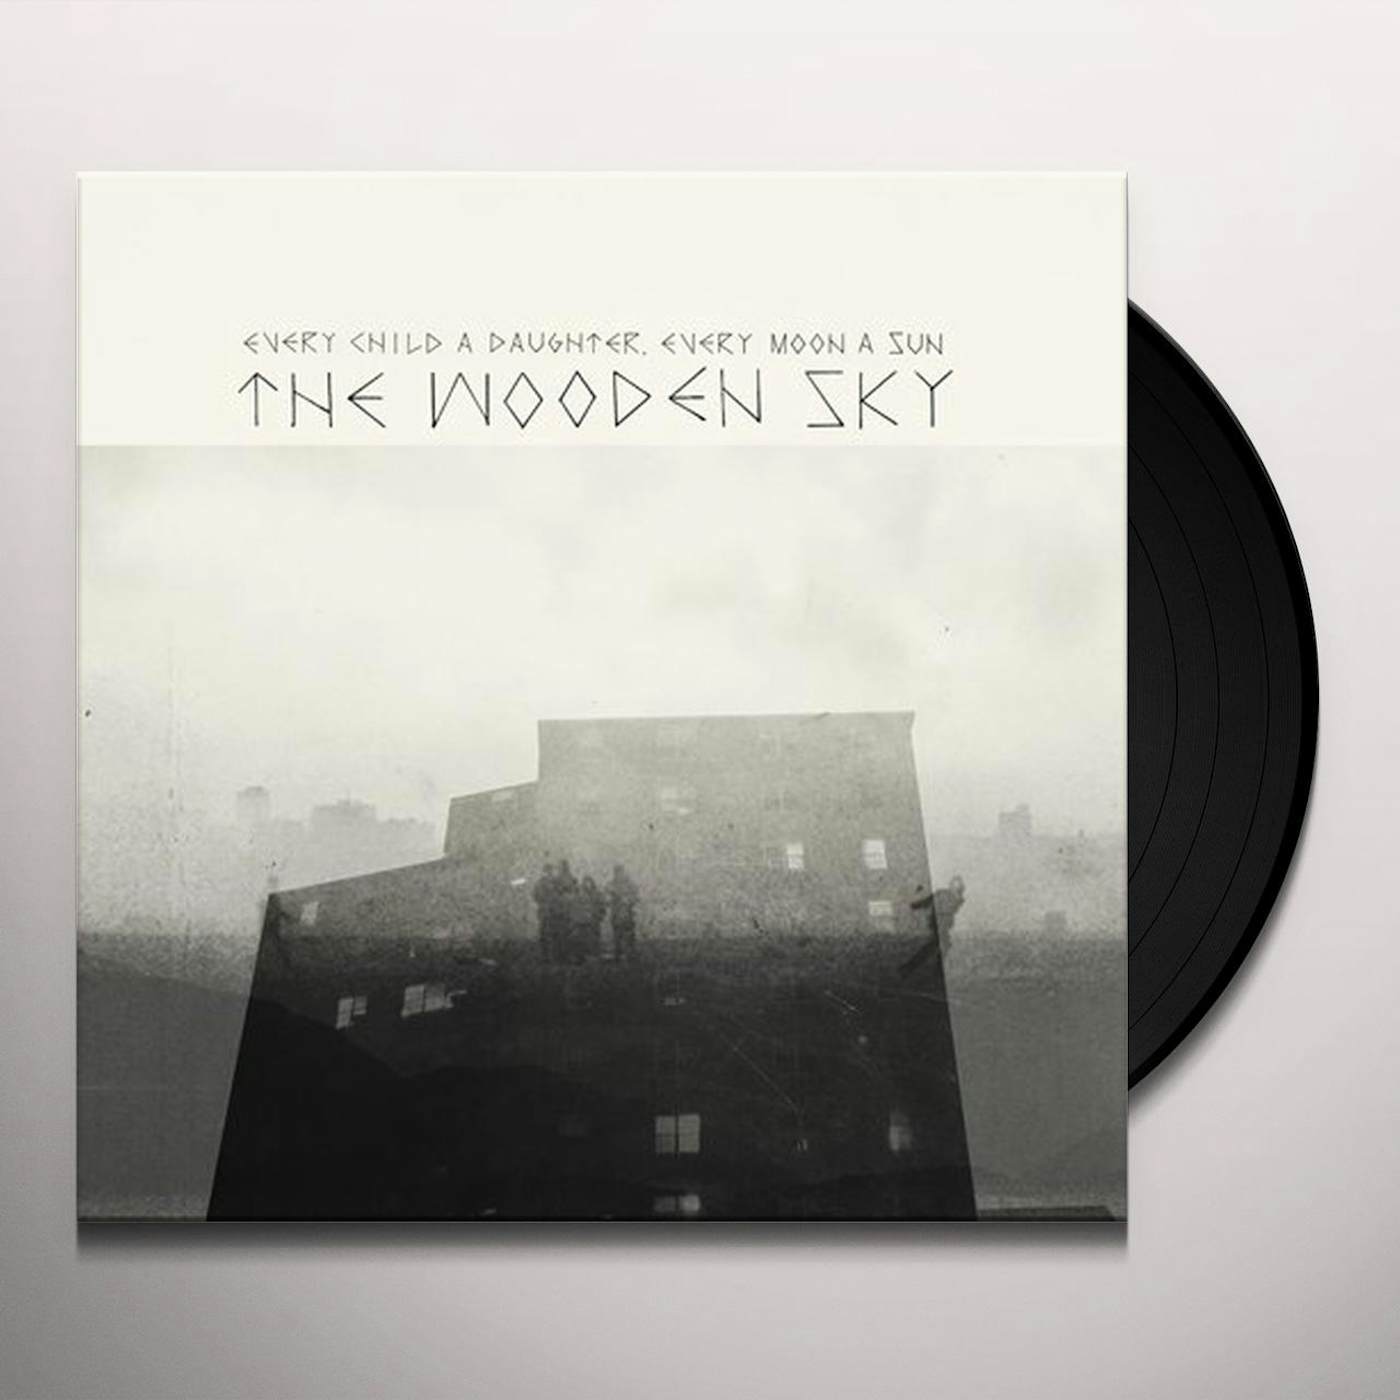 The Wooden Sky EVERY CHILD A DAUGHTER EVERY MOON A SUN Vinyl Record